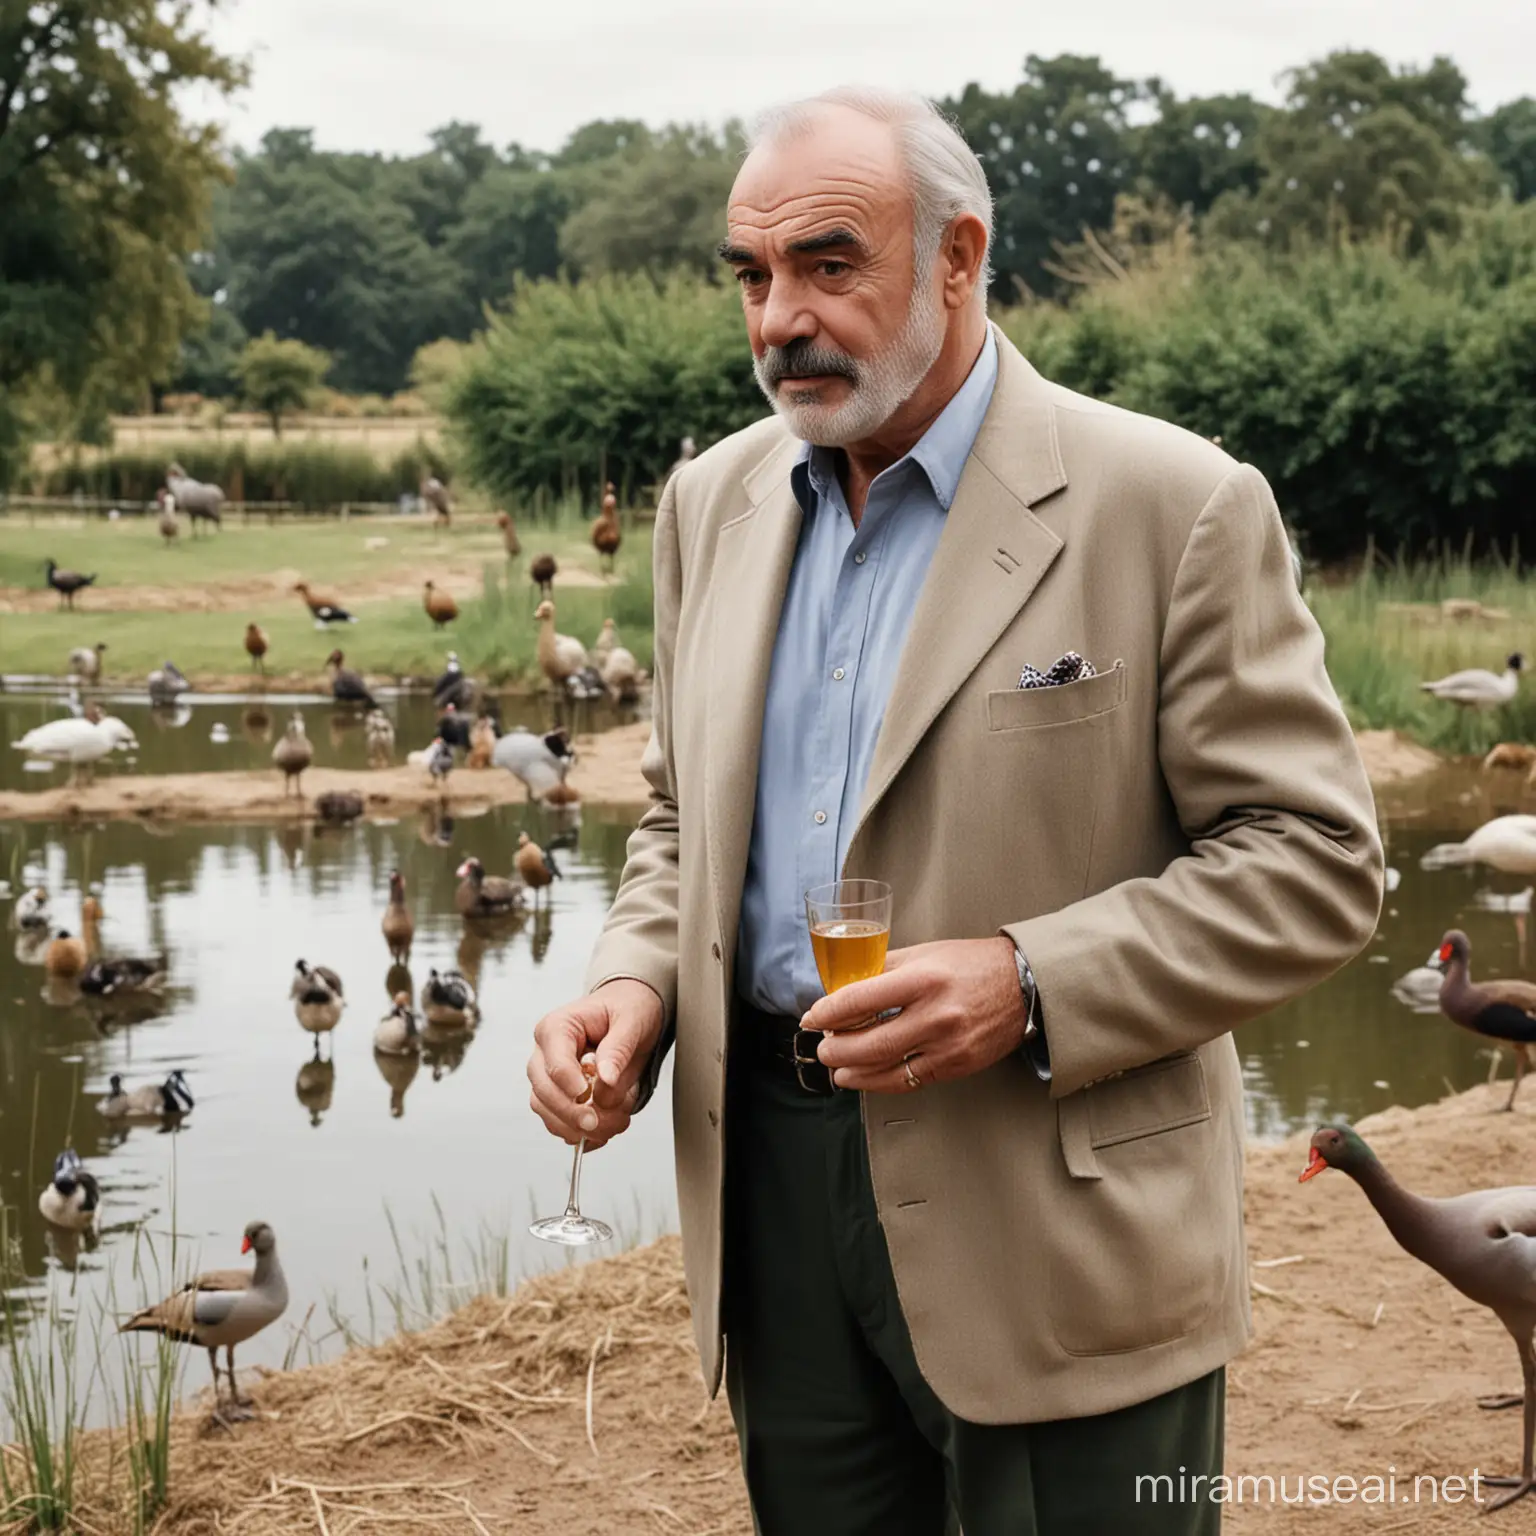 Sean Connery Enjoying a Stroll with Scotch in a Picturesque Wildfowl Park